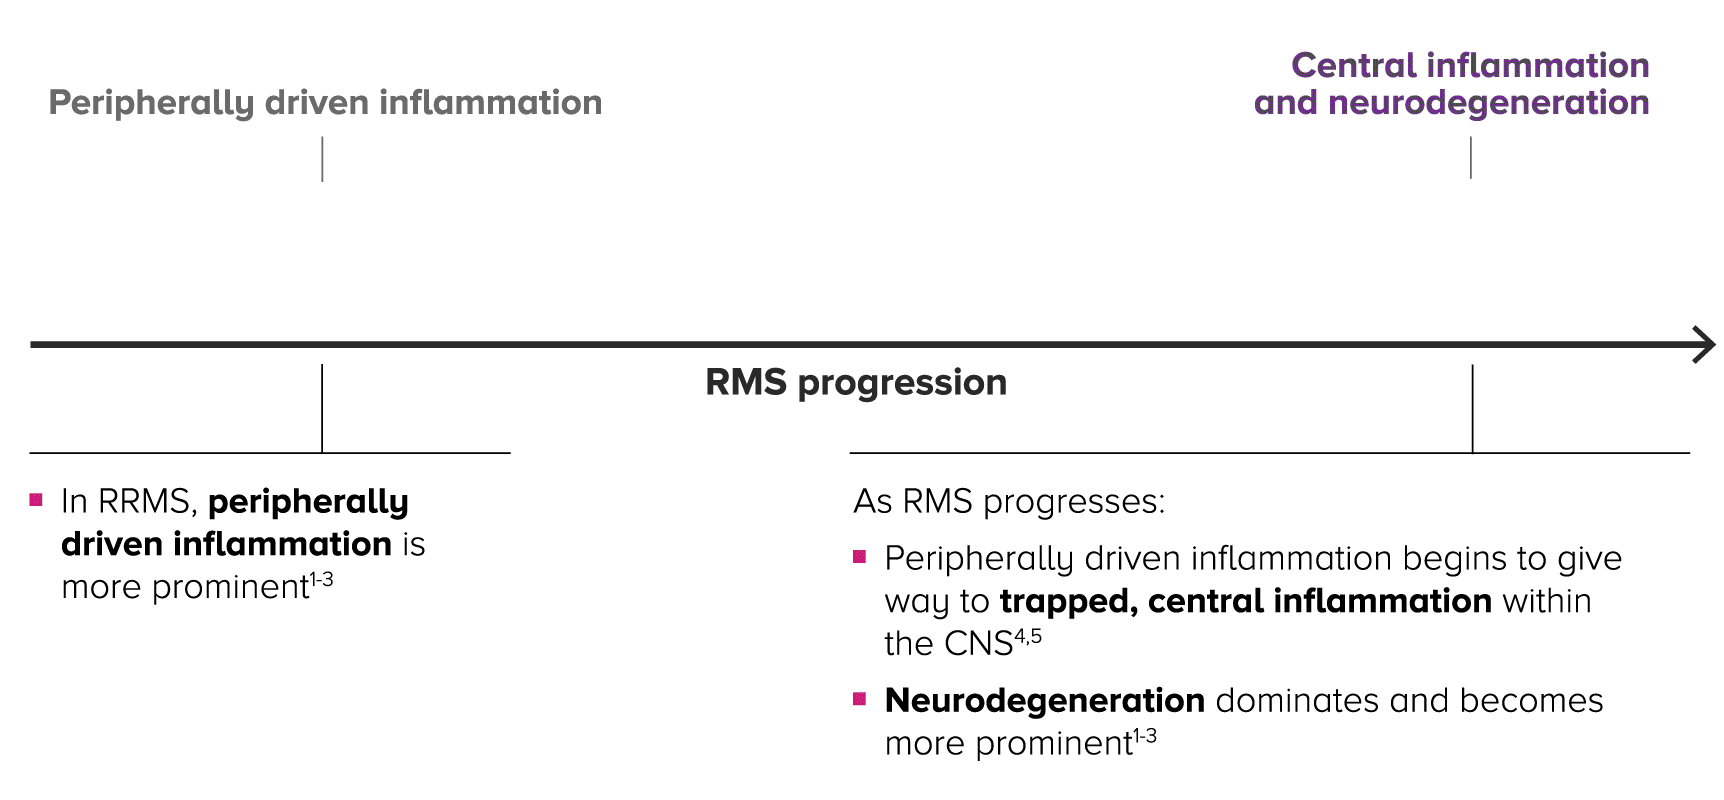 In Relapsing MS progression there is an inverse relationship between inflammation and neurodegeneration 